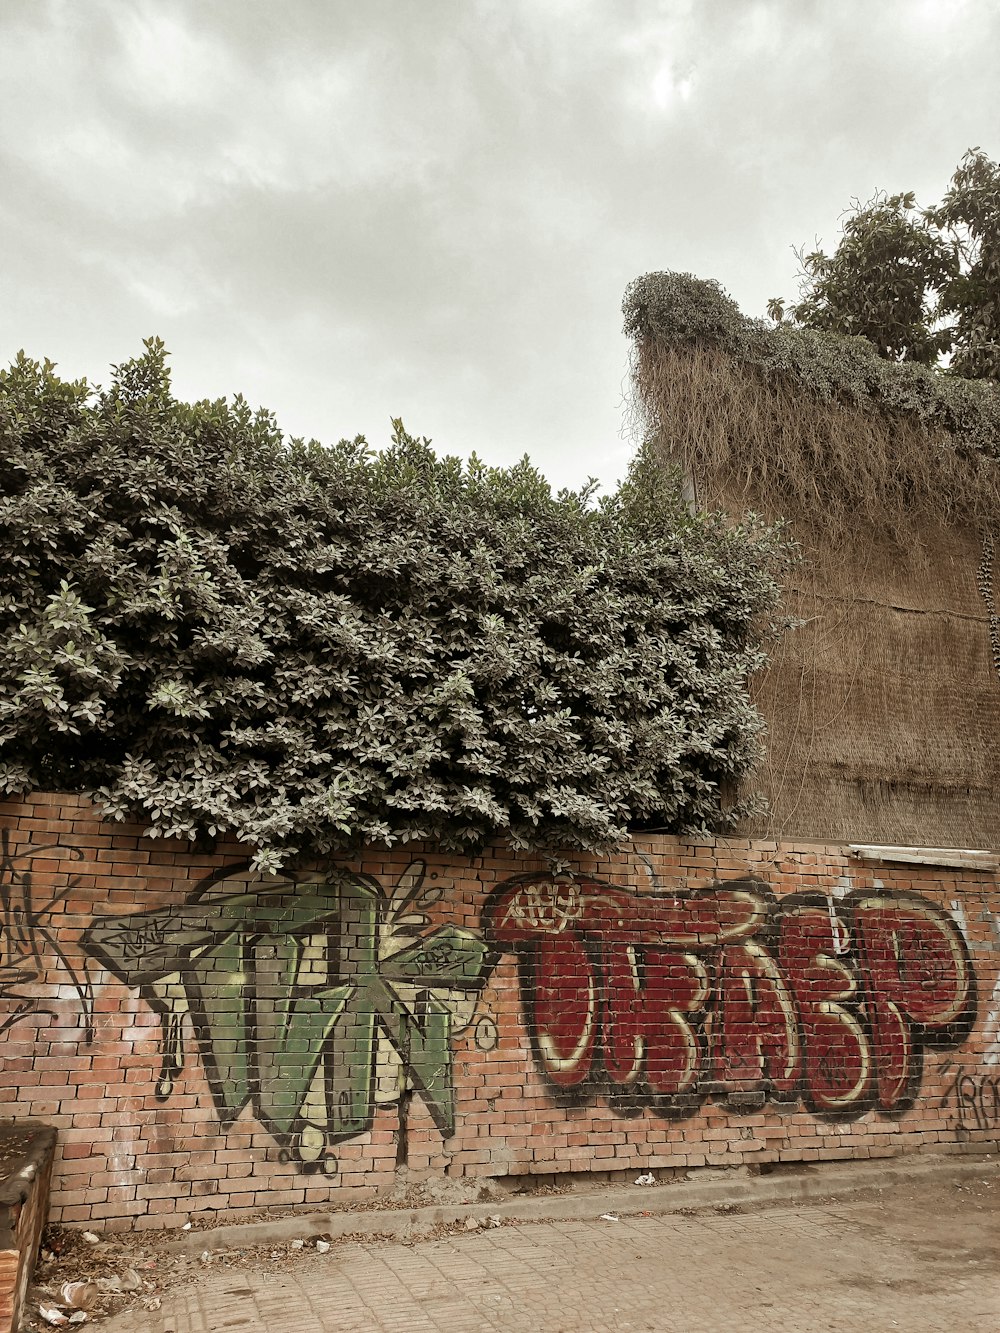 a brick wall covered in graffiti next to a tree